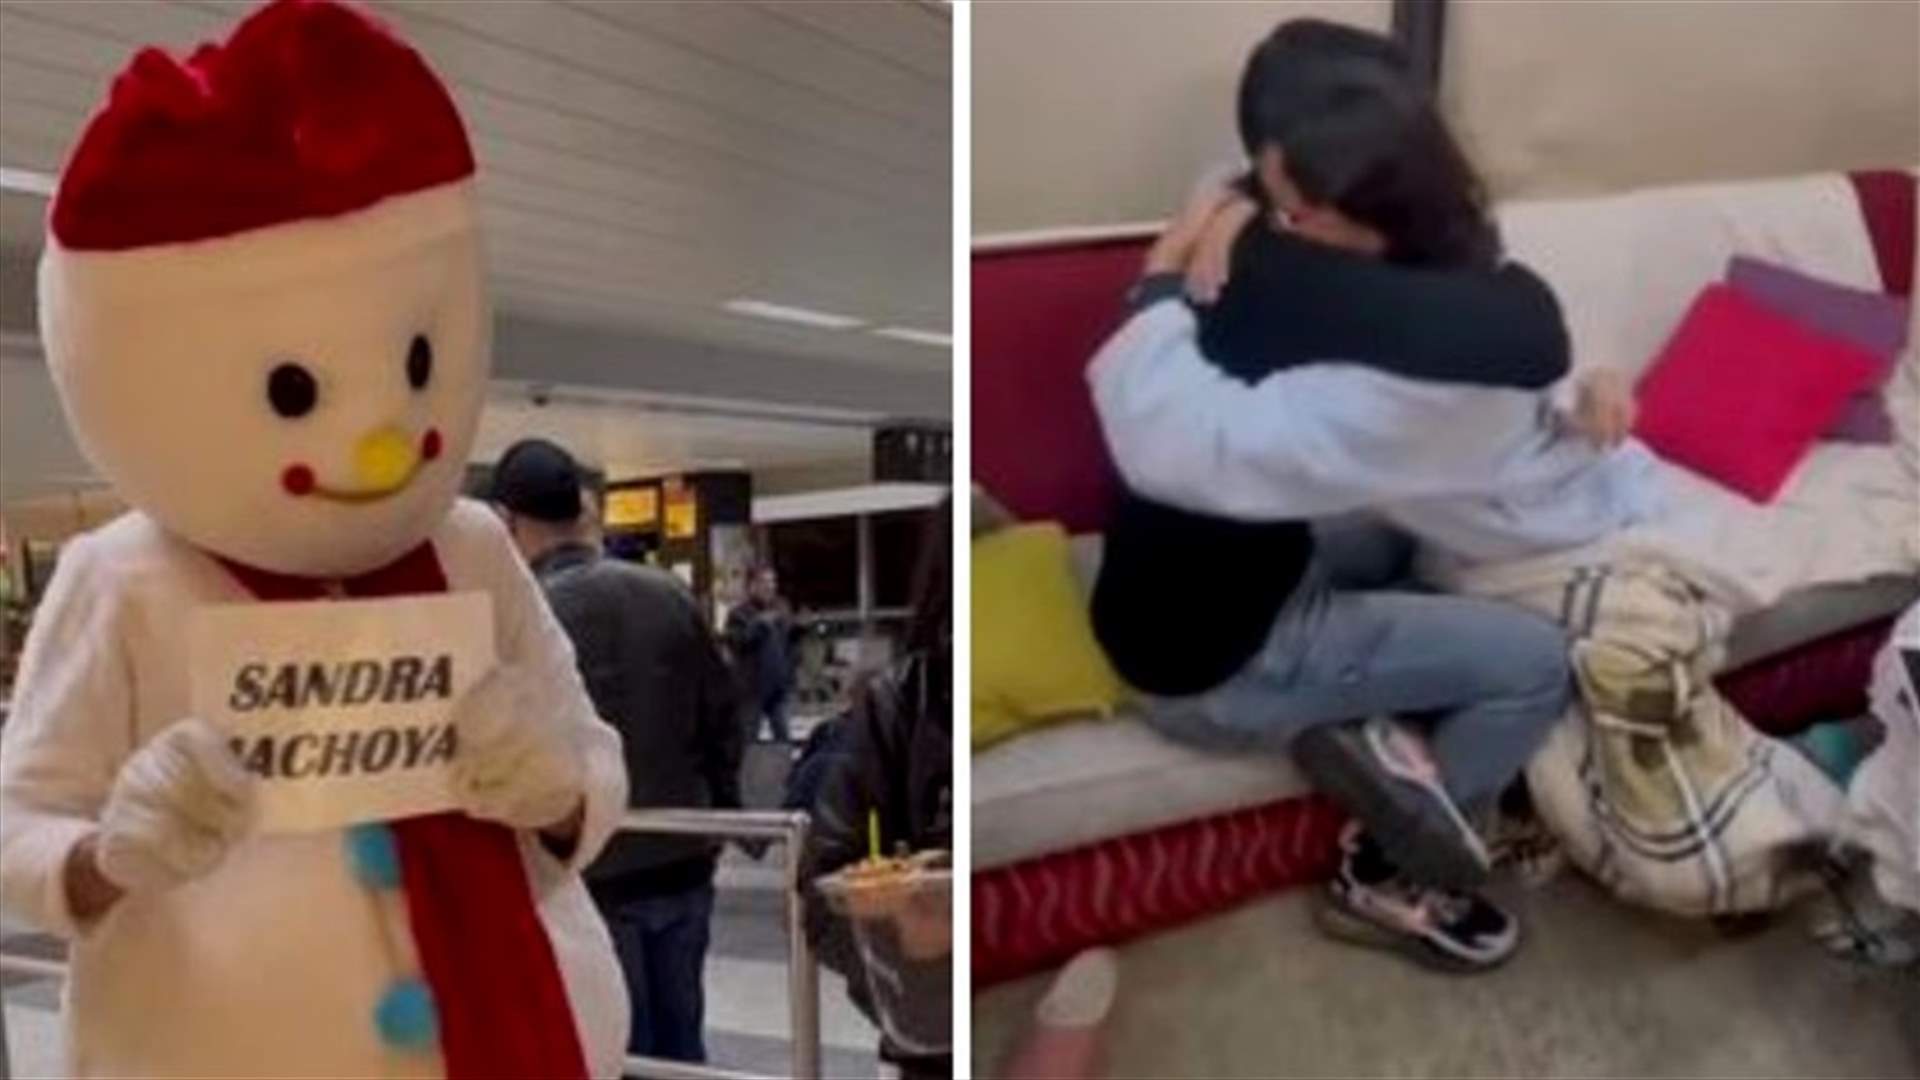 Lebanese expats share wholesome videos surprising their loved ones for Christmas